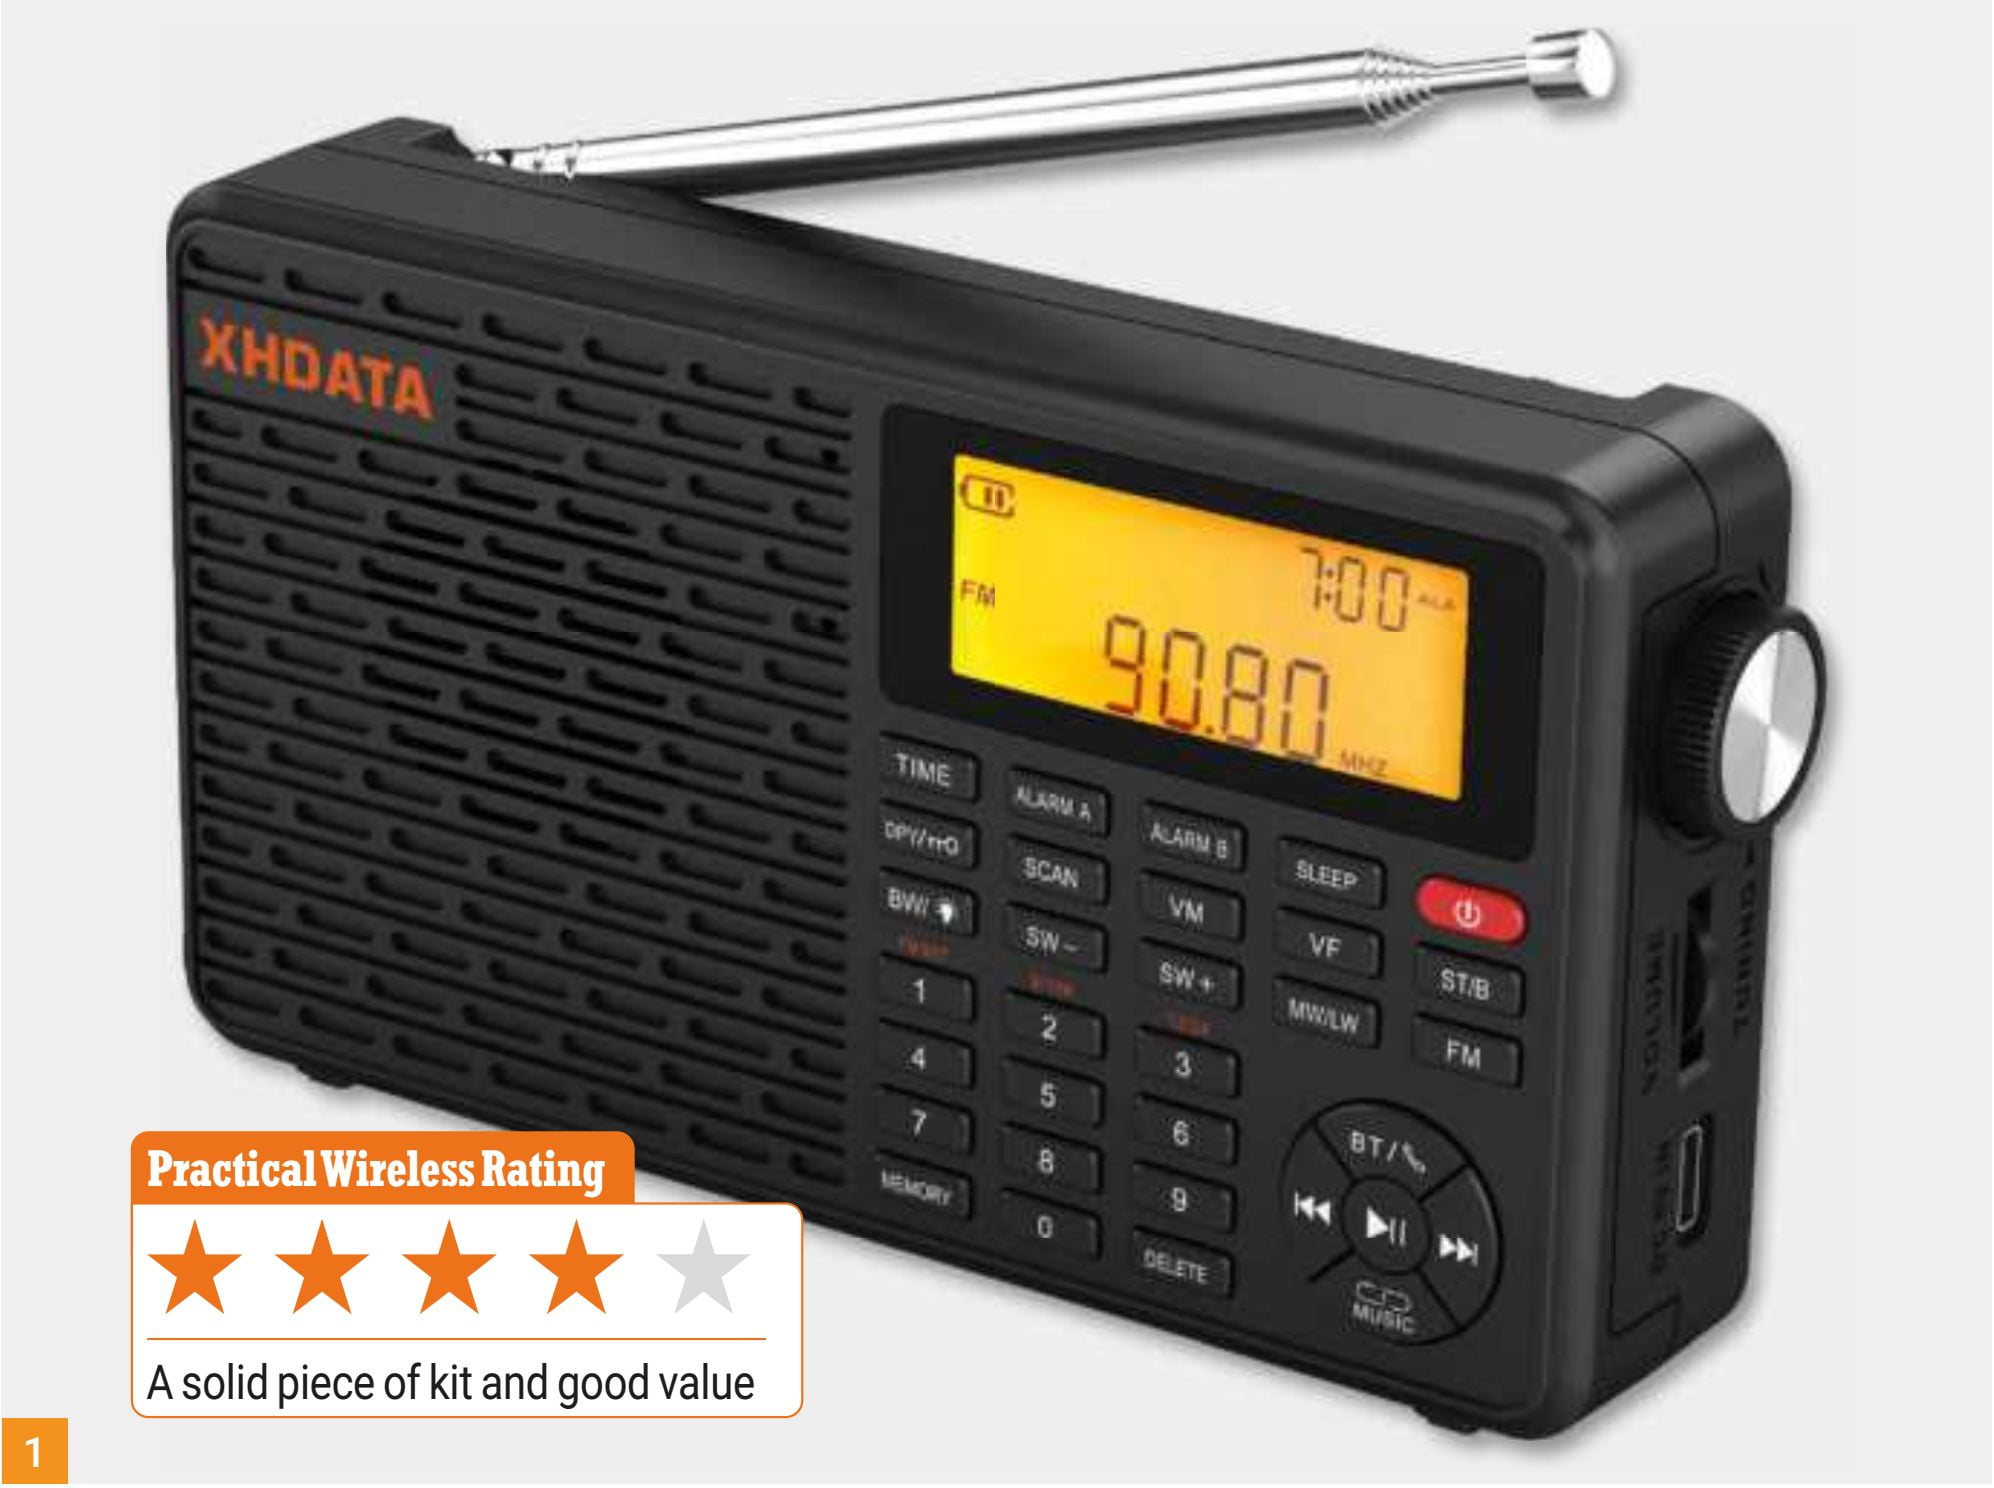 Fig. 1: The XHDATA D-109 Multiband Radio and Bluetooth Music Player.